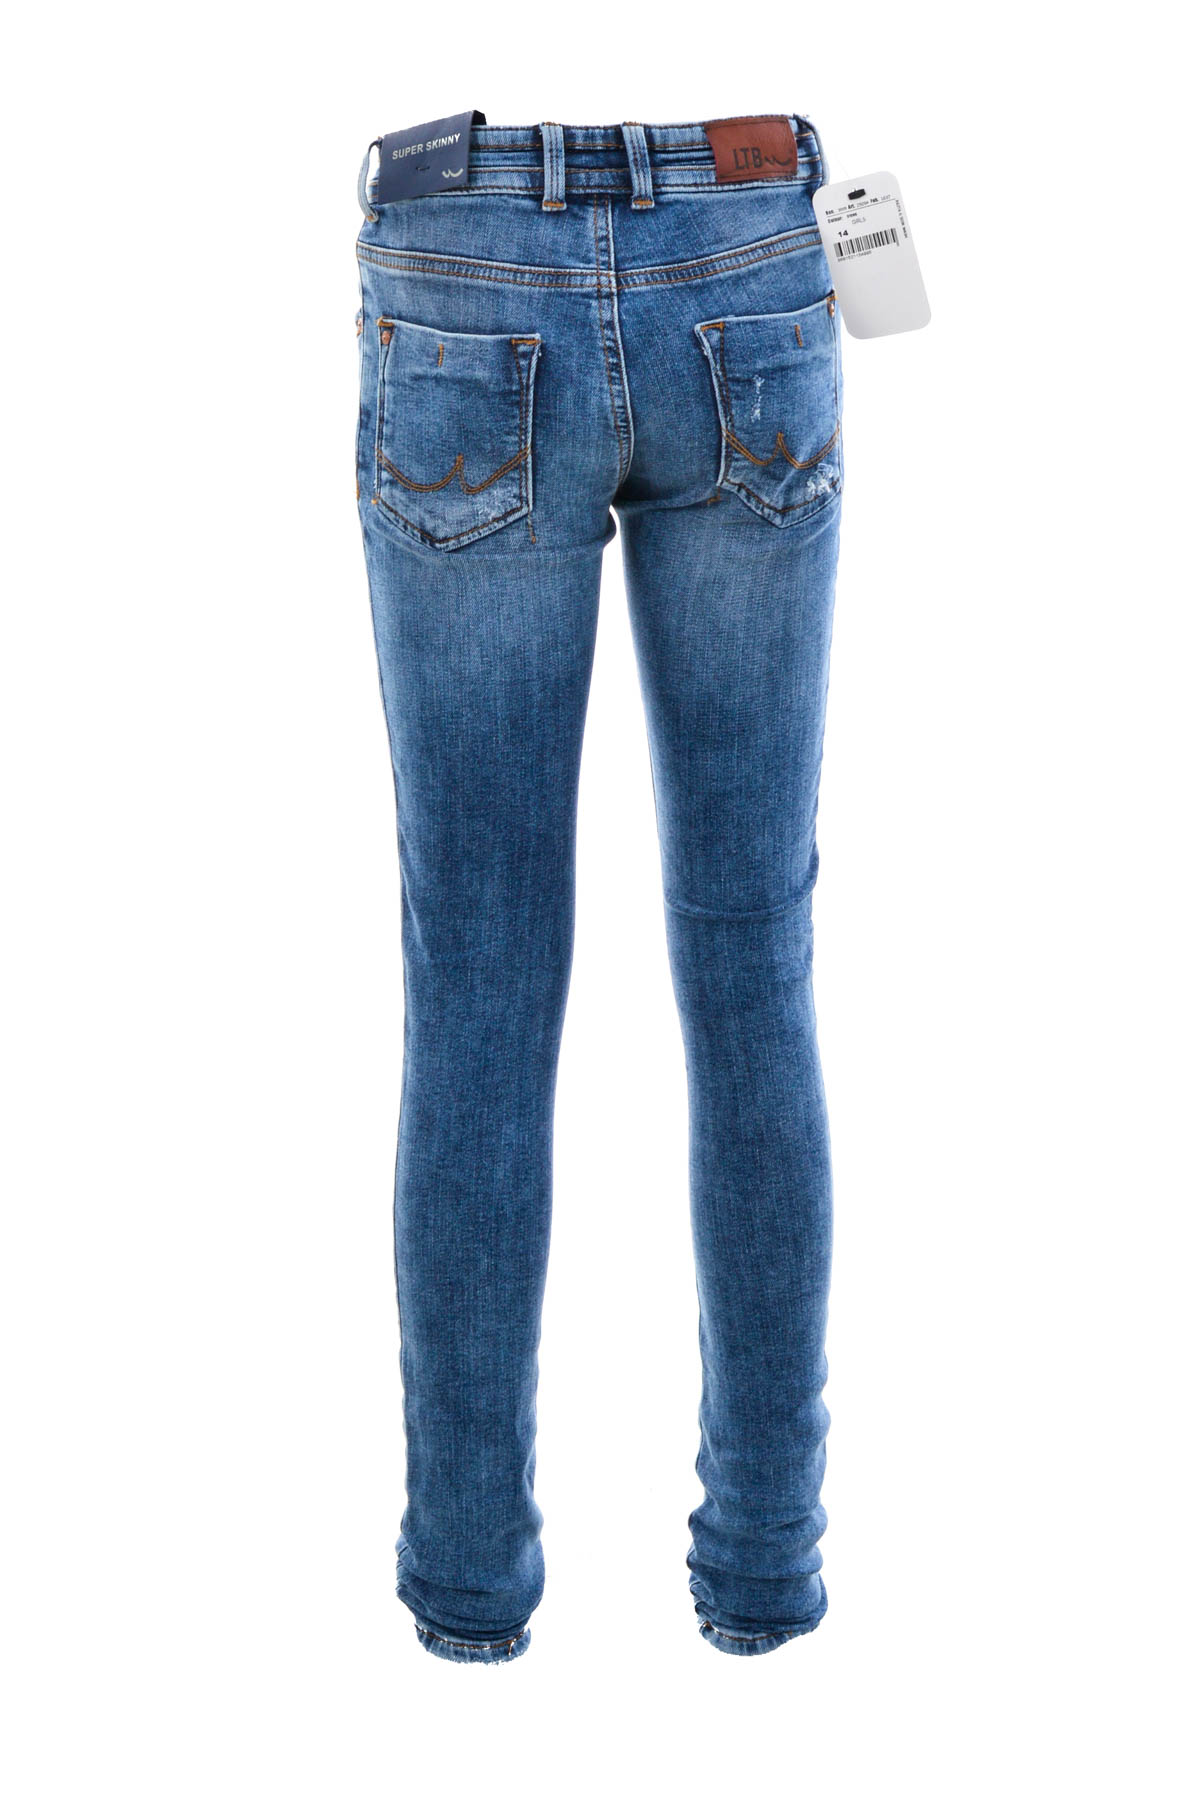 Girl's jeans - LTB - 1